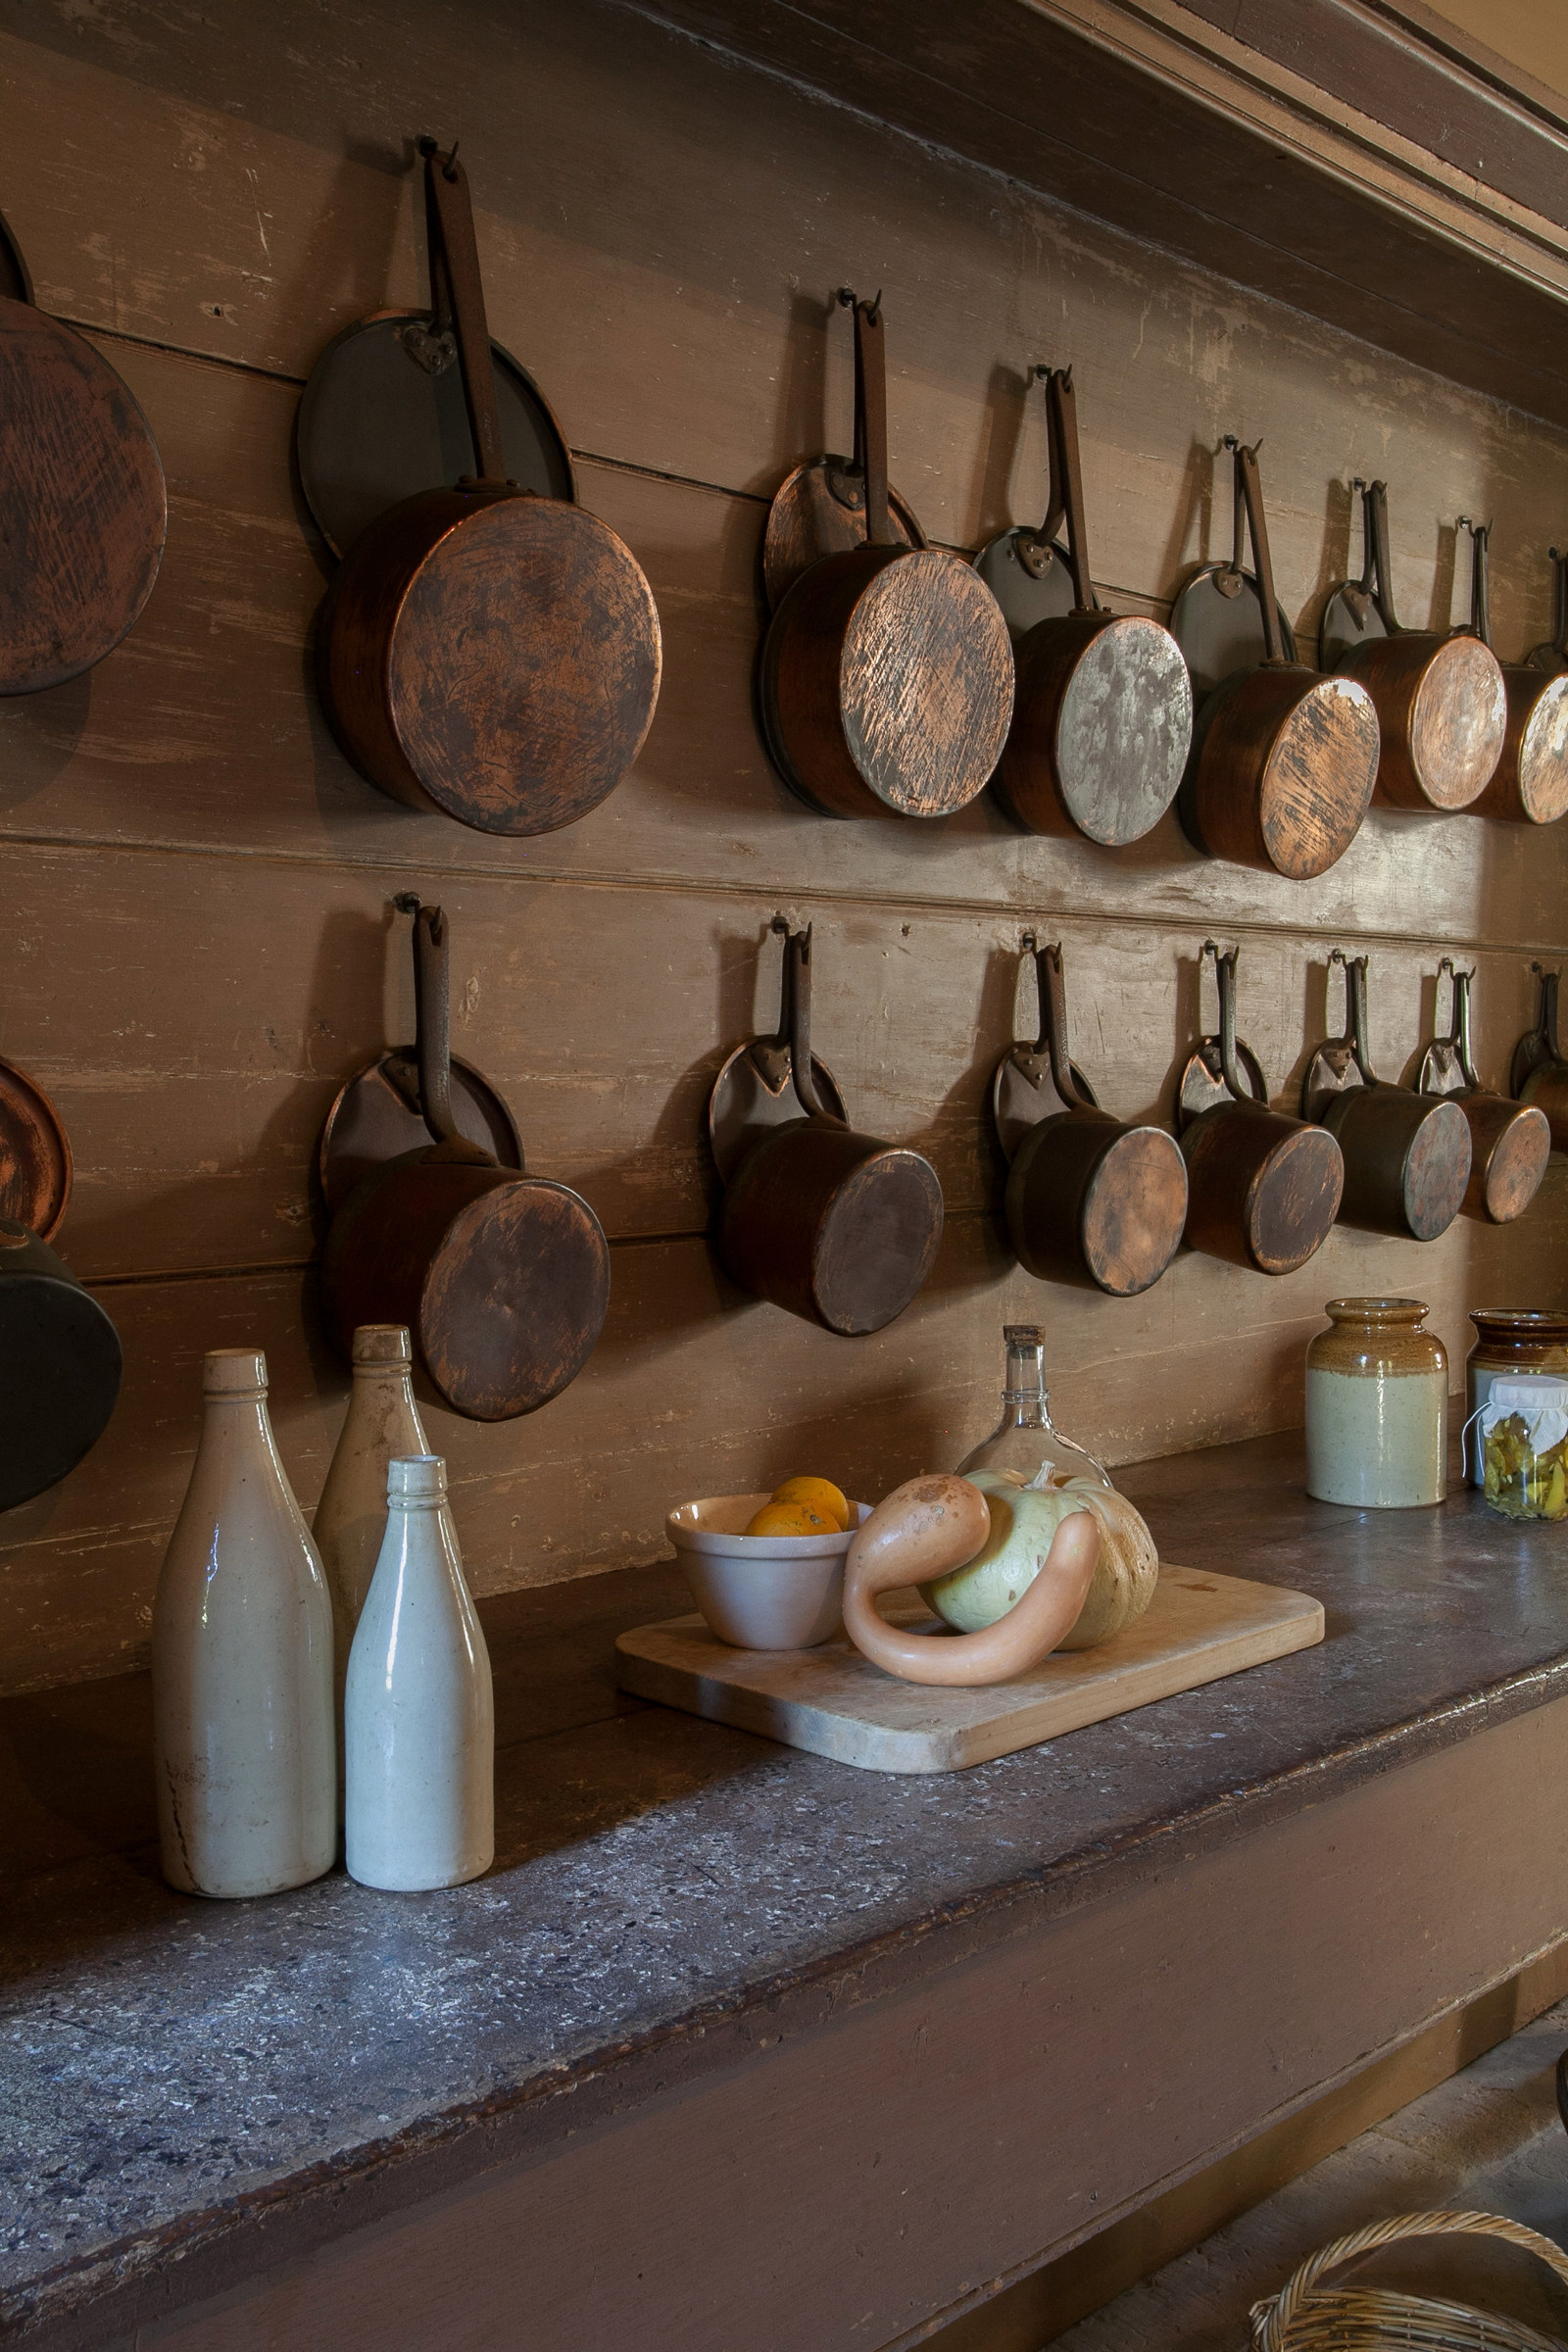 Clay bottles, a gourd, a bowl of oranges, a pumpkin and pots hanging on the brown painted cedar dresser in kitchen, Vaucluse House